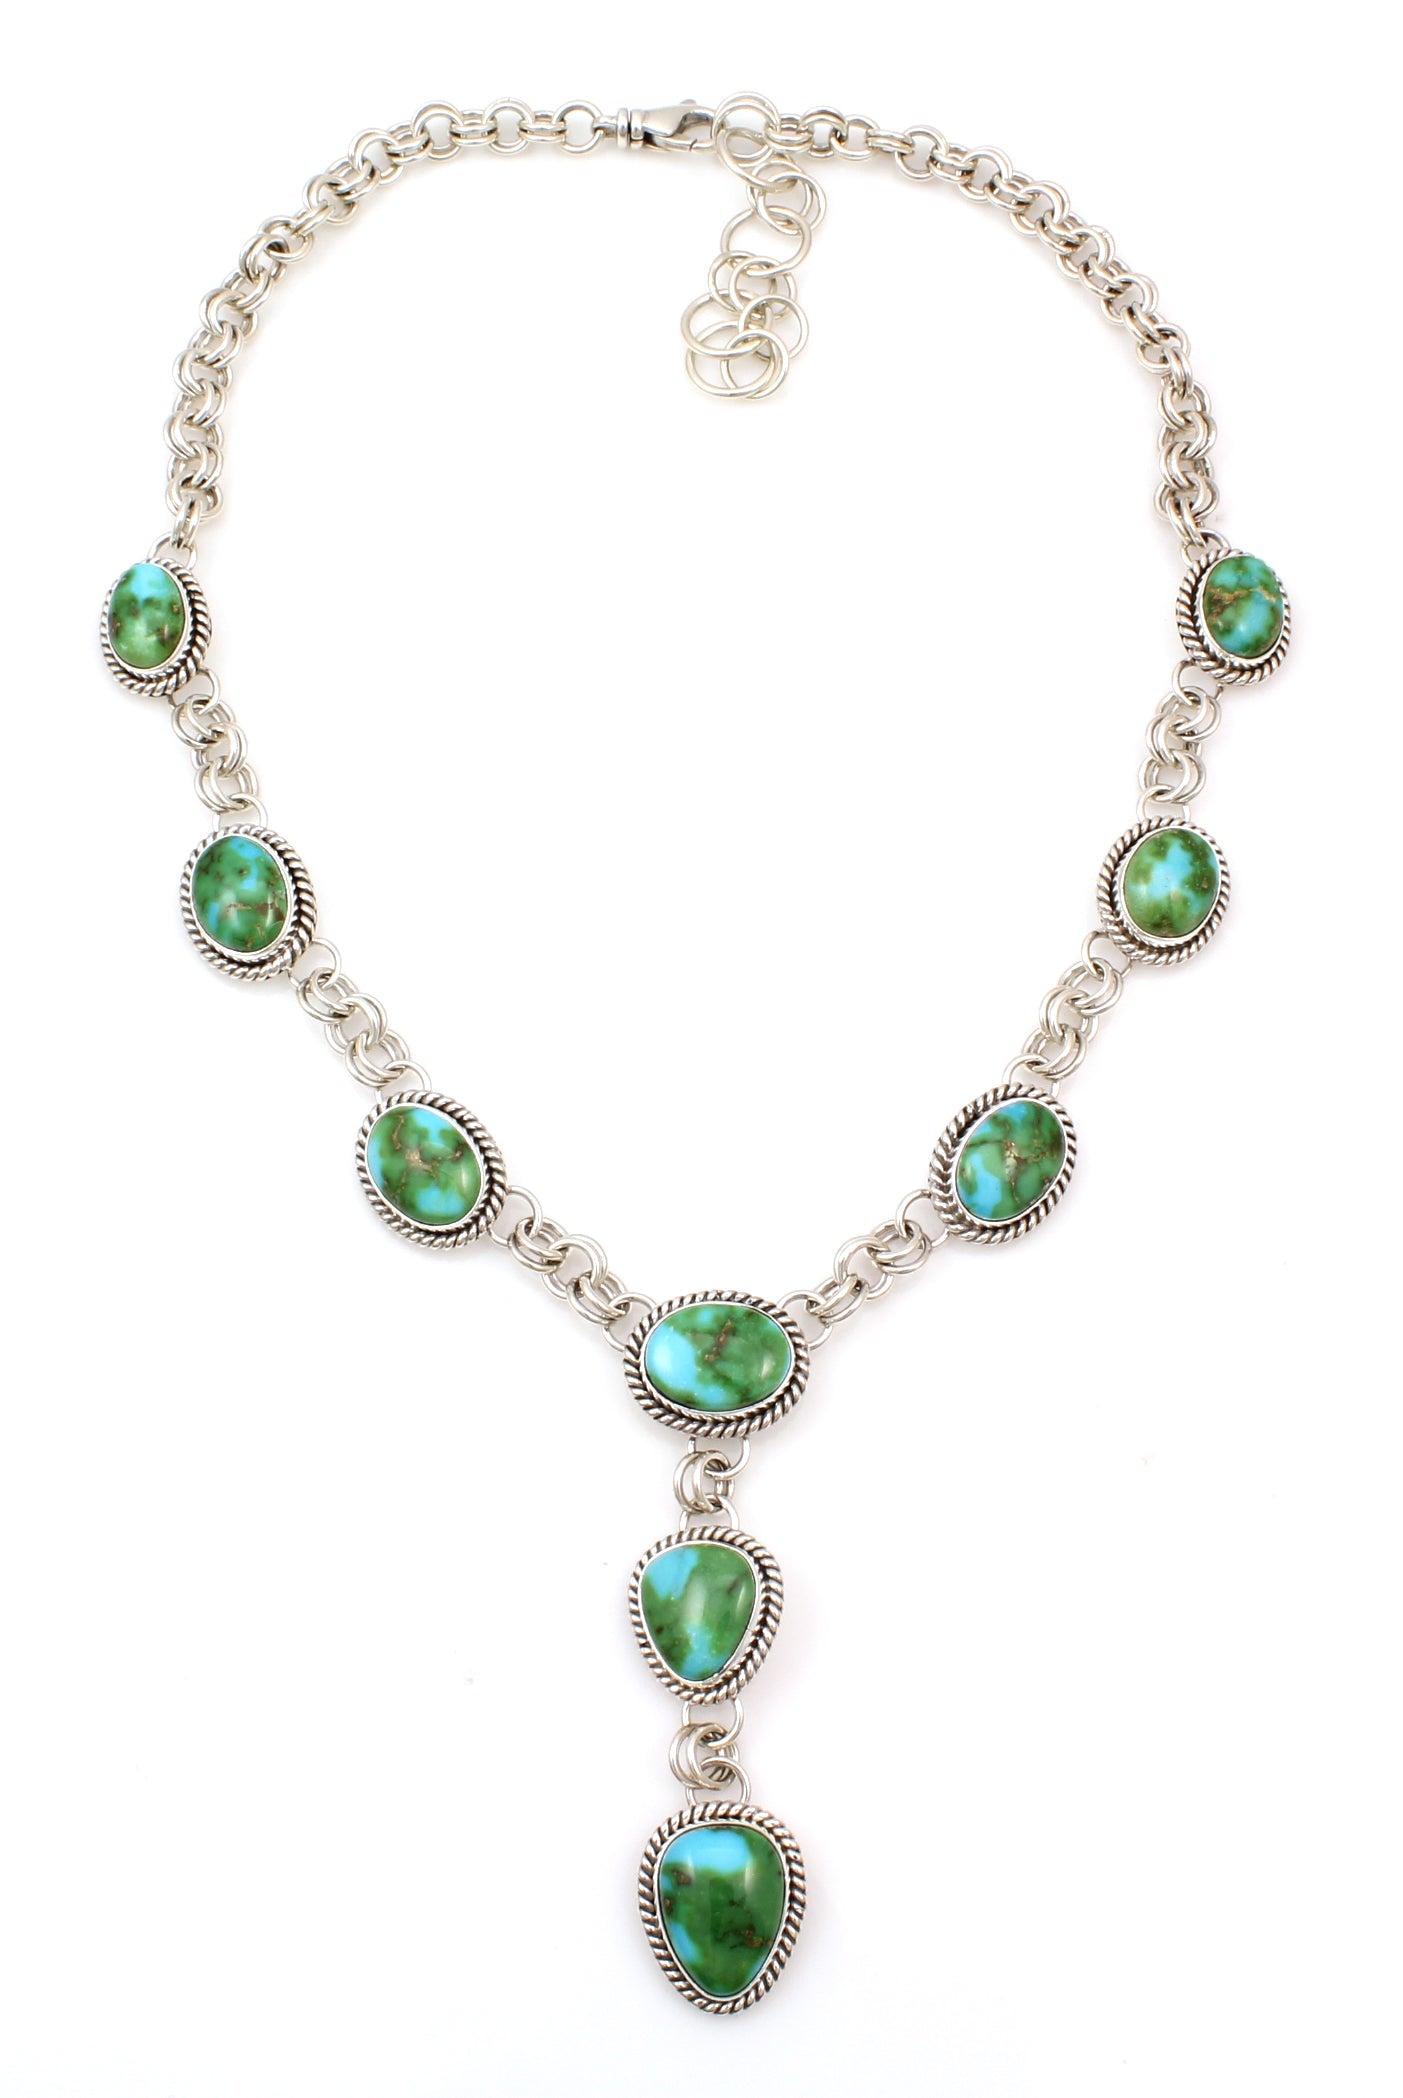 Sonoran Gold Turquoise Y Necklace-Jewelry-Artie Yellowhorse-Sorrel Sky Gallery